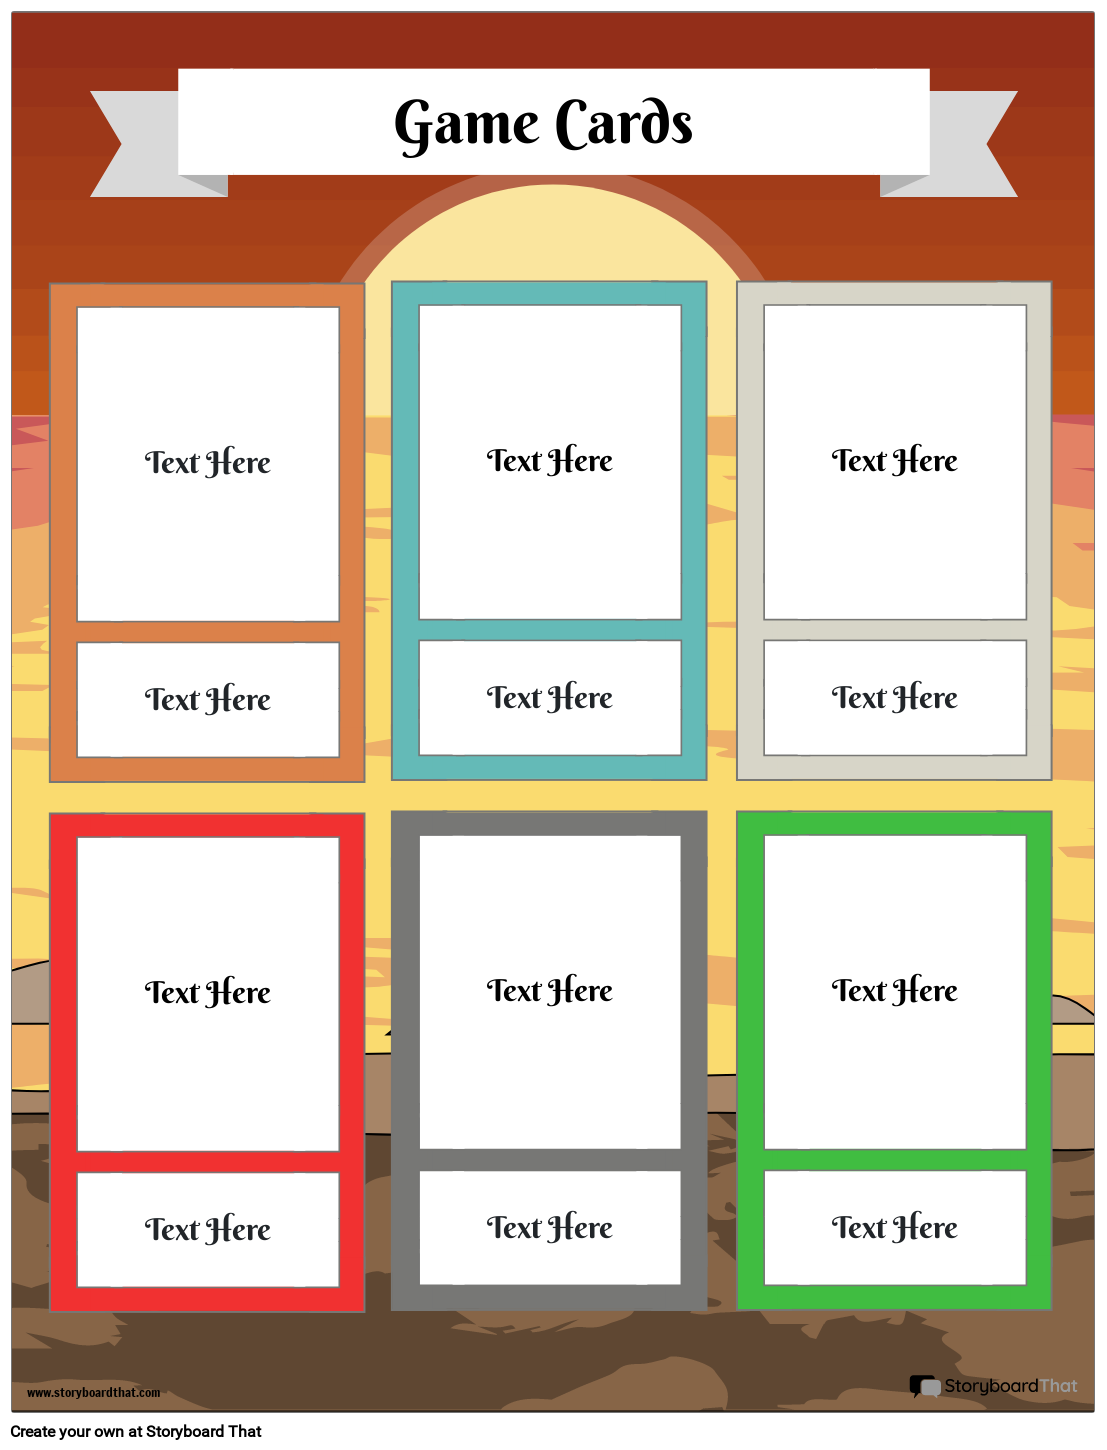 card-game-template-game-card-maker-create-playing-cards-storyboardthat